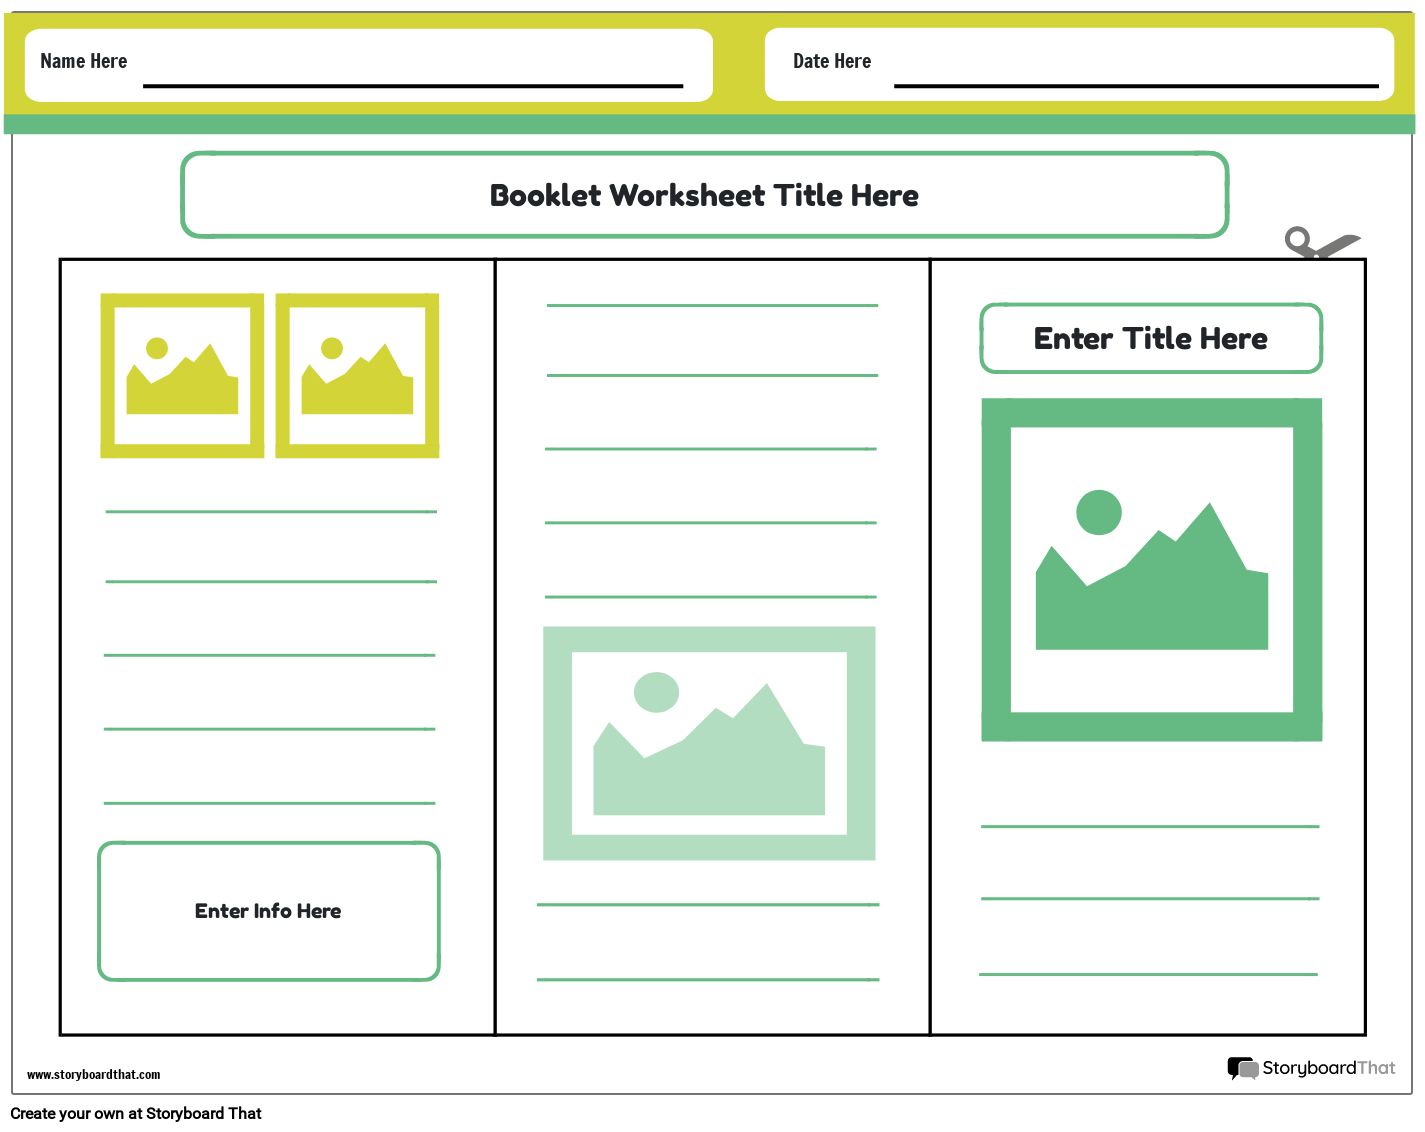 Colorful Booklet Template with Different Shades of Green